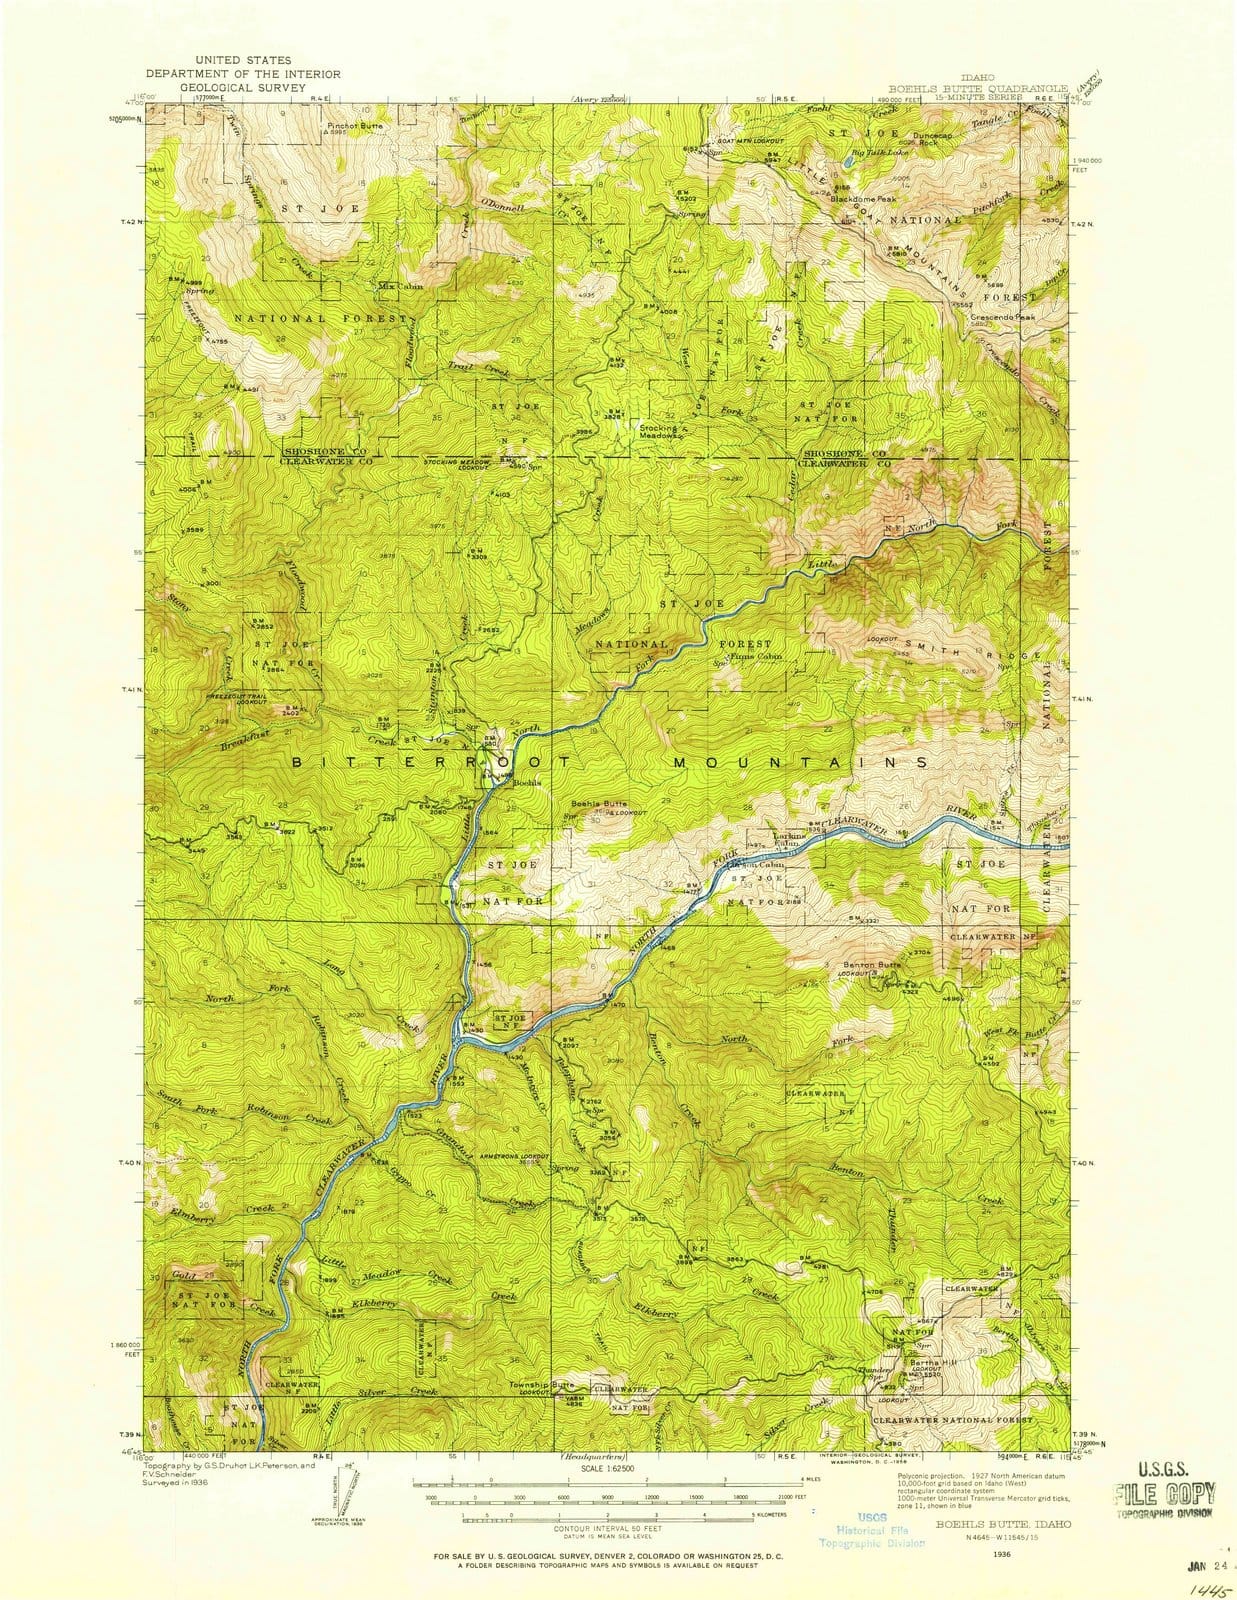 1936 Boehls Butte, ID - Idaho - USGS Topographic Map